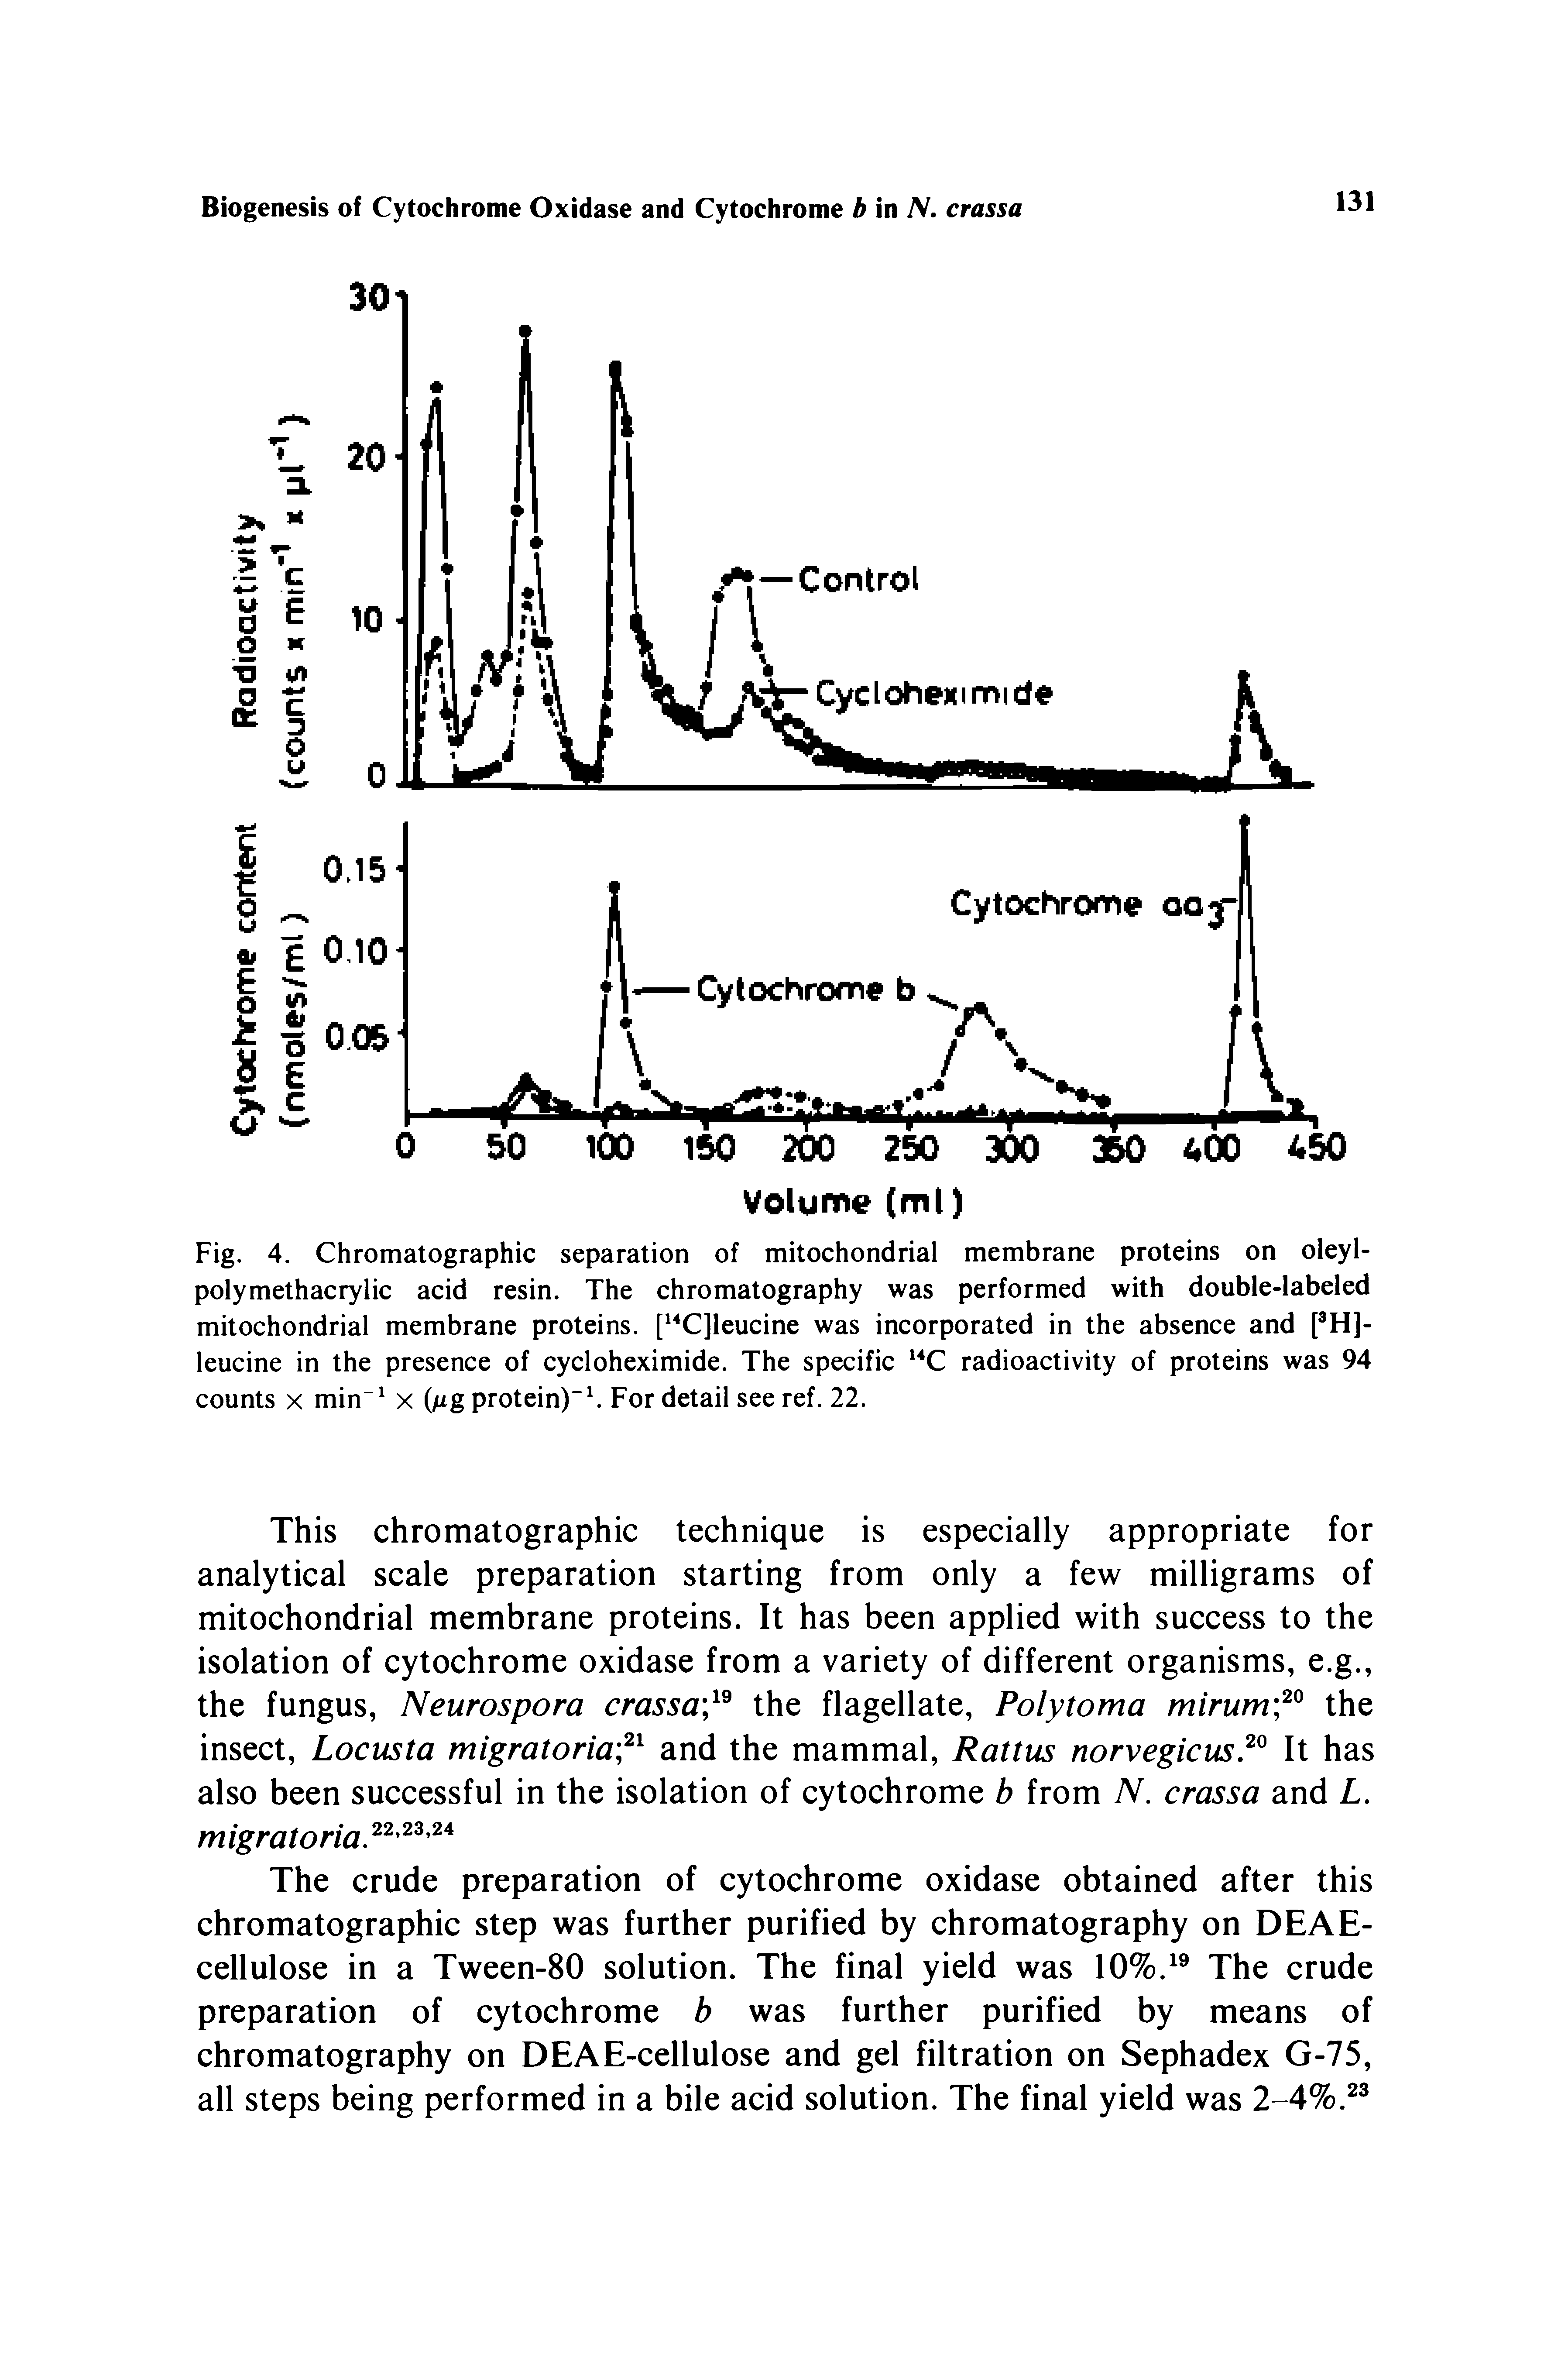 Fig. 4. Chromatographic separation of mitochondrial membrane proteins on oleyl-polymethacrylic acid resin. The chromatography was performed with double-labeled mitochondrial membrane proteins. [ CJleucine was incorporated in the absence and [ H]-leucine in the presence of cycloheximide. The specific C radioactivity of proteins was 94 counts X min x (Mg protein)" For detail see ref. 22.